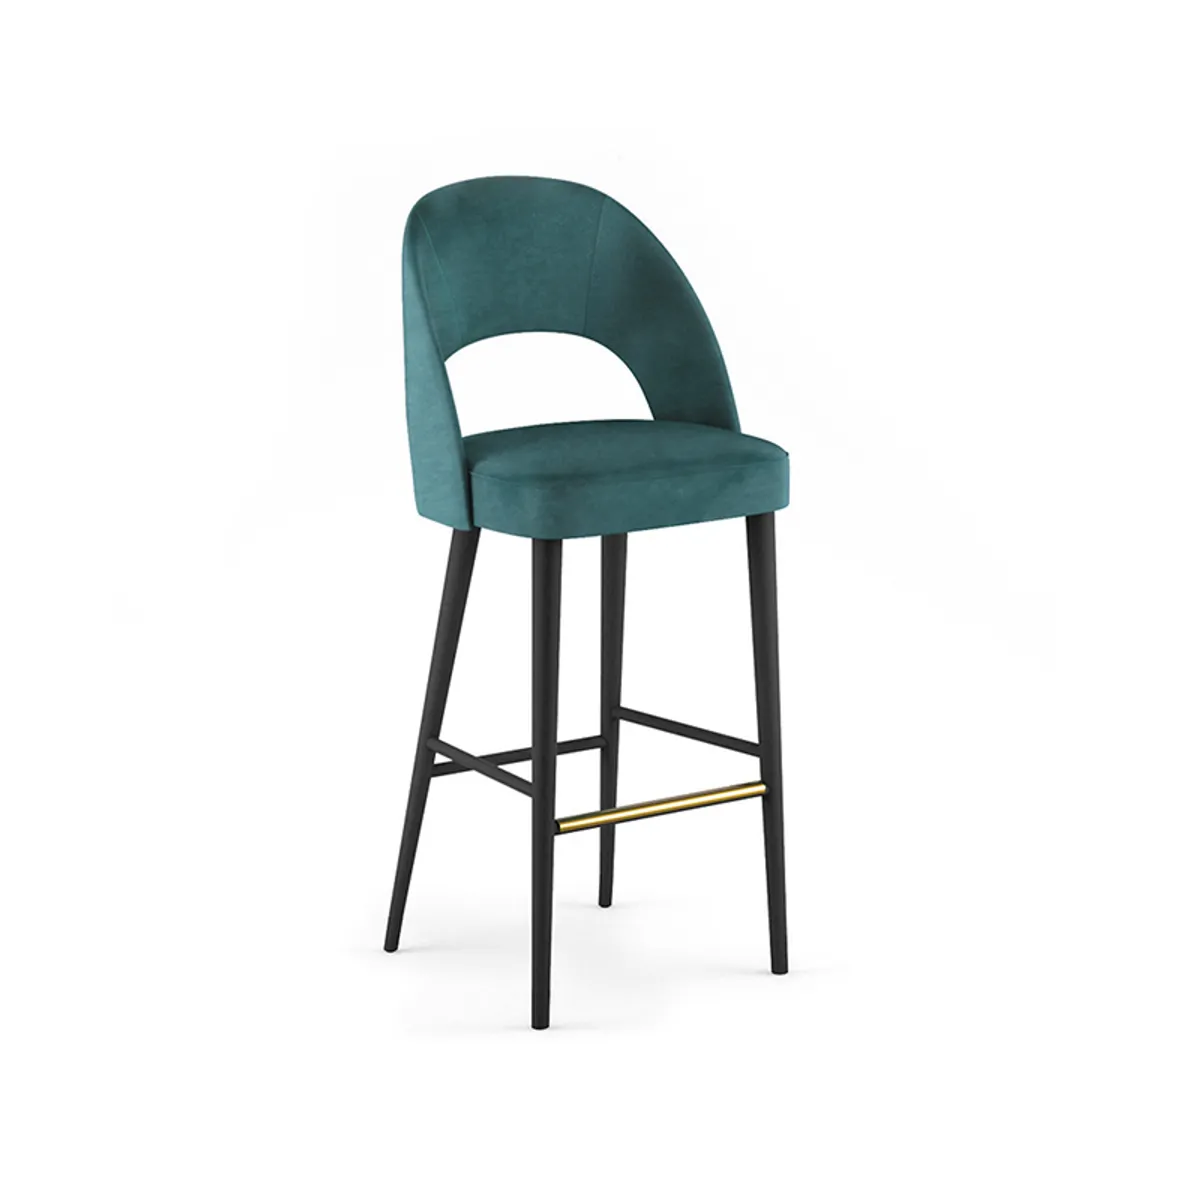 emilia-bar-stool-upholstered-stool-with-wooden-legs